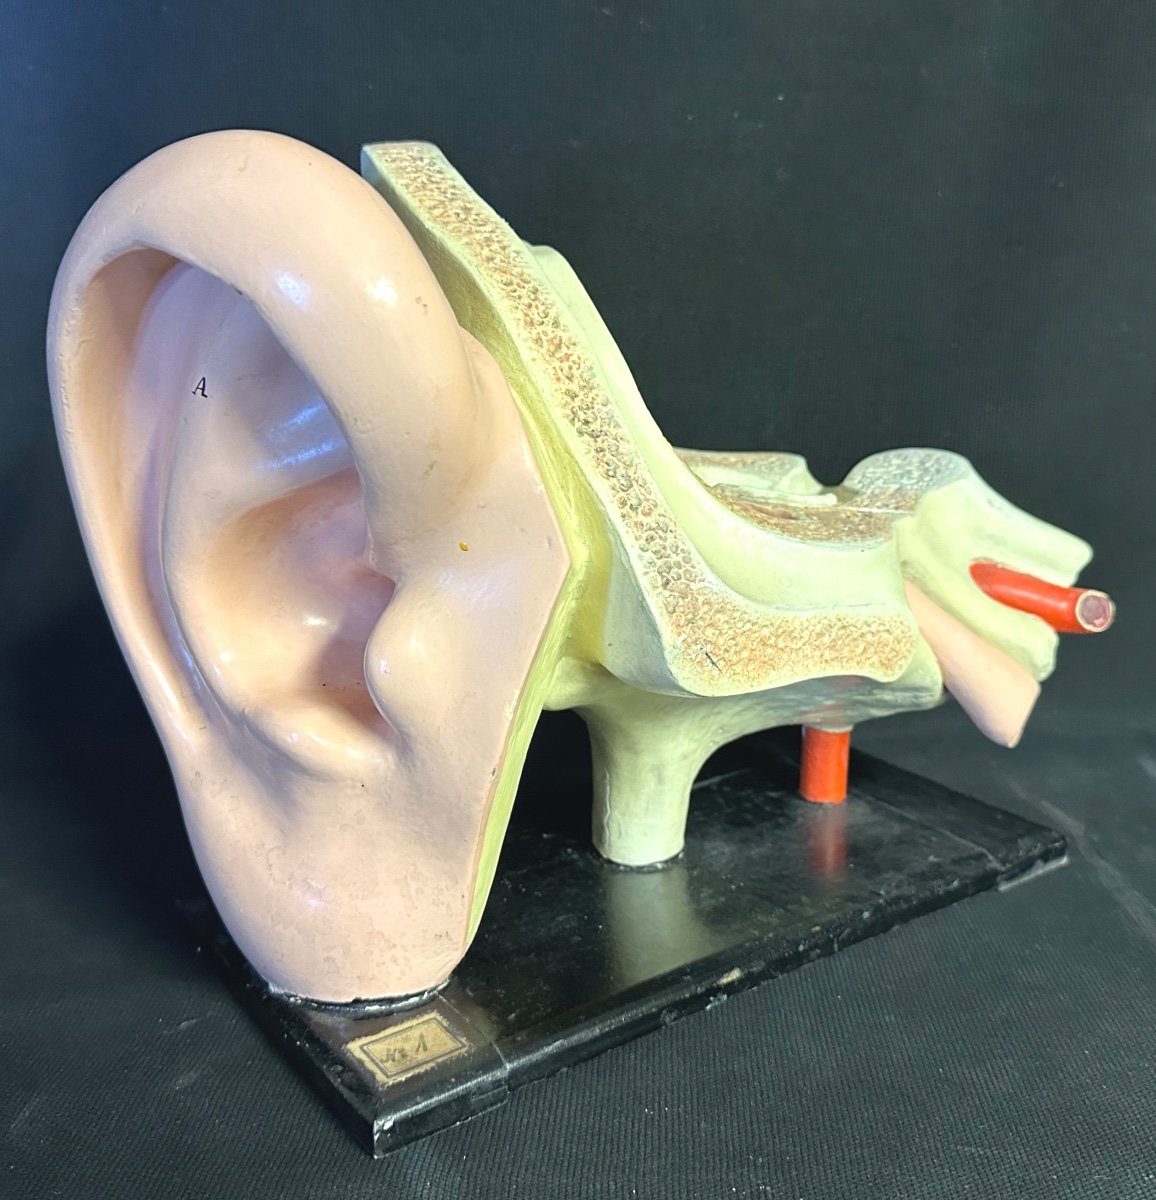 Rare Anatomical Ear And Hearing System 19th Century Polychrome Stucco Object Of Didactic Curiosity